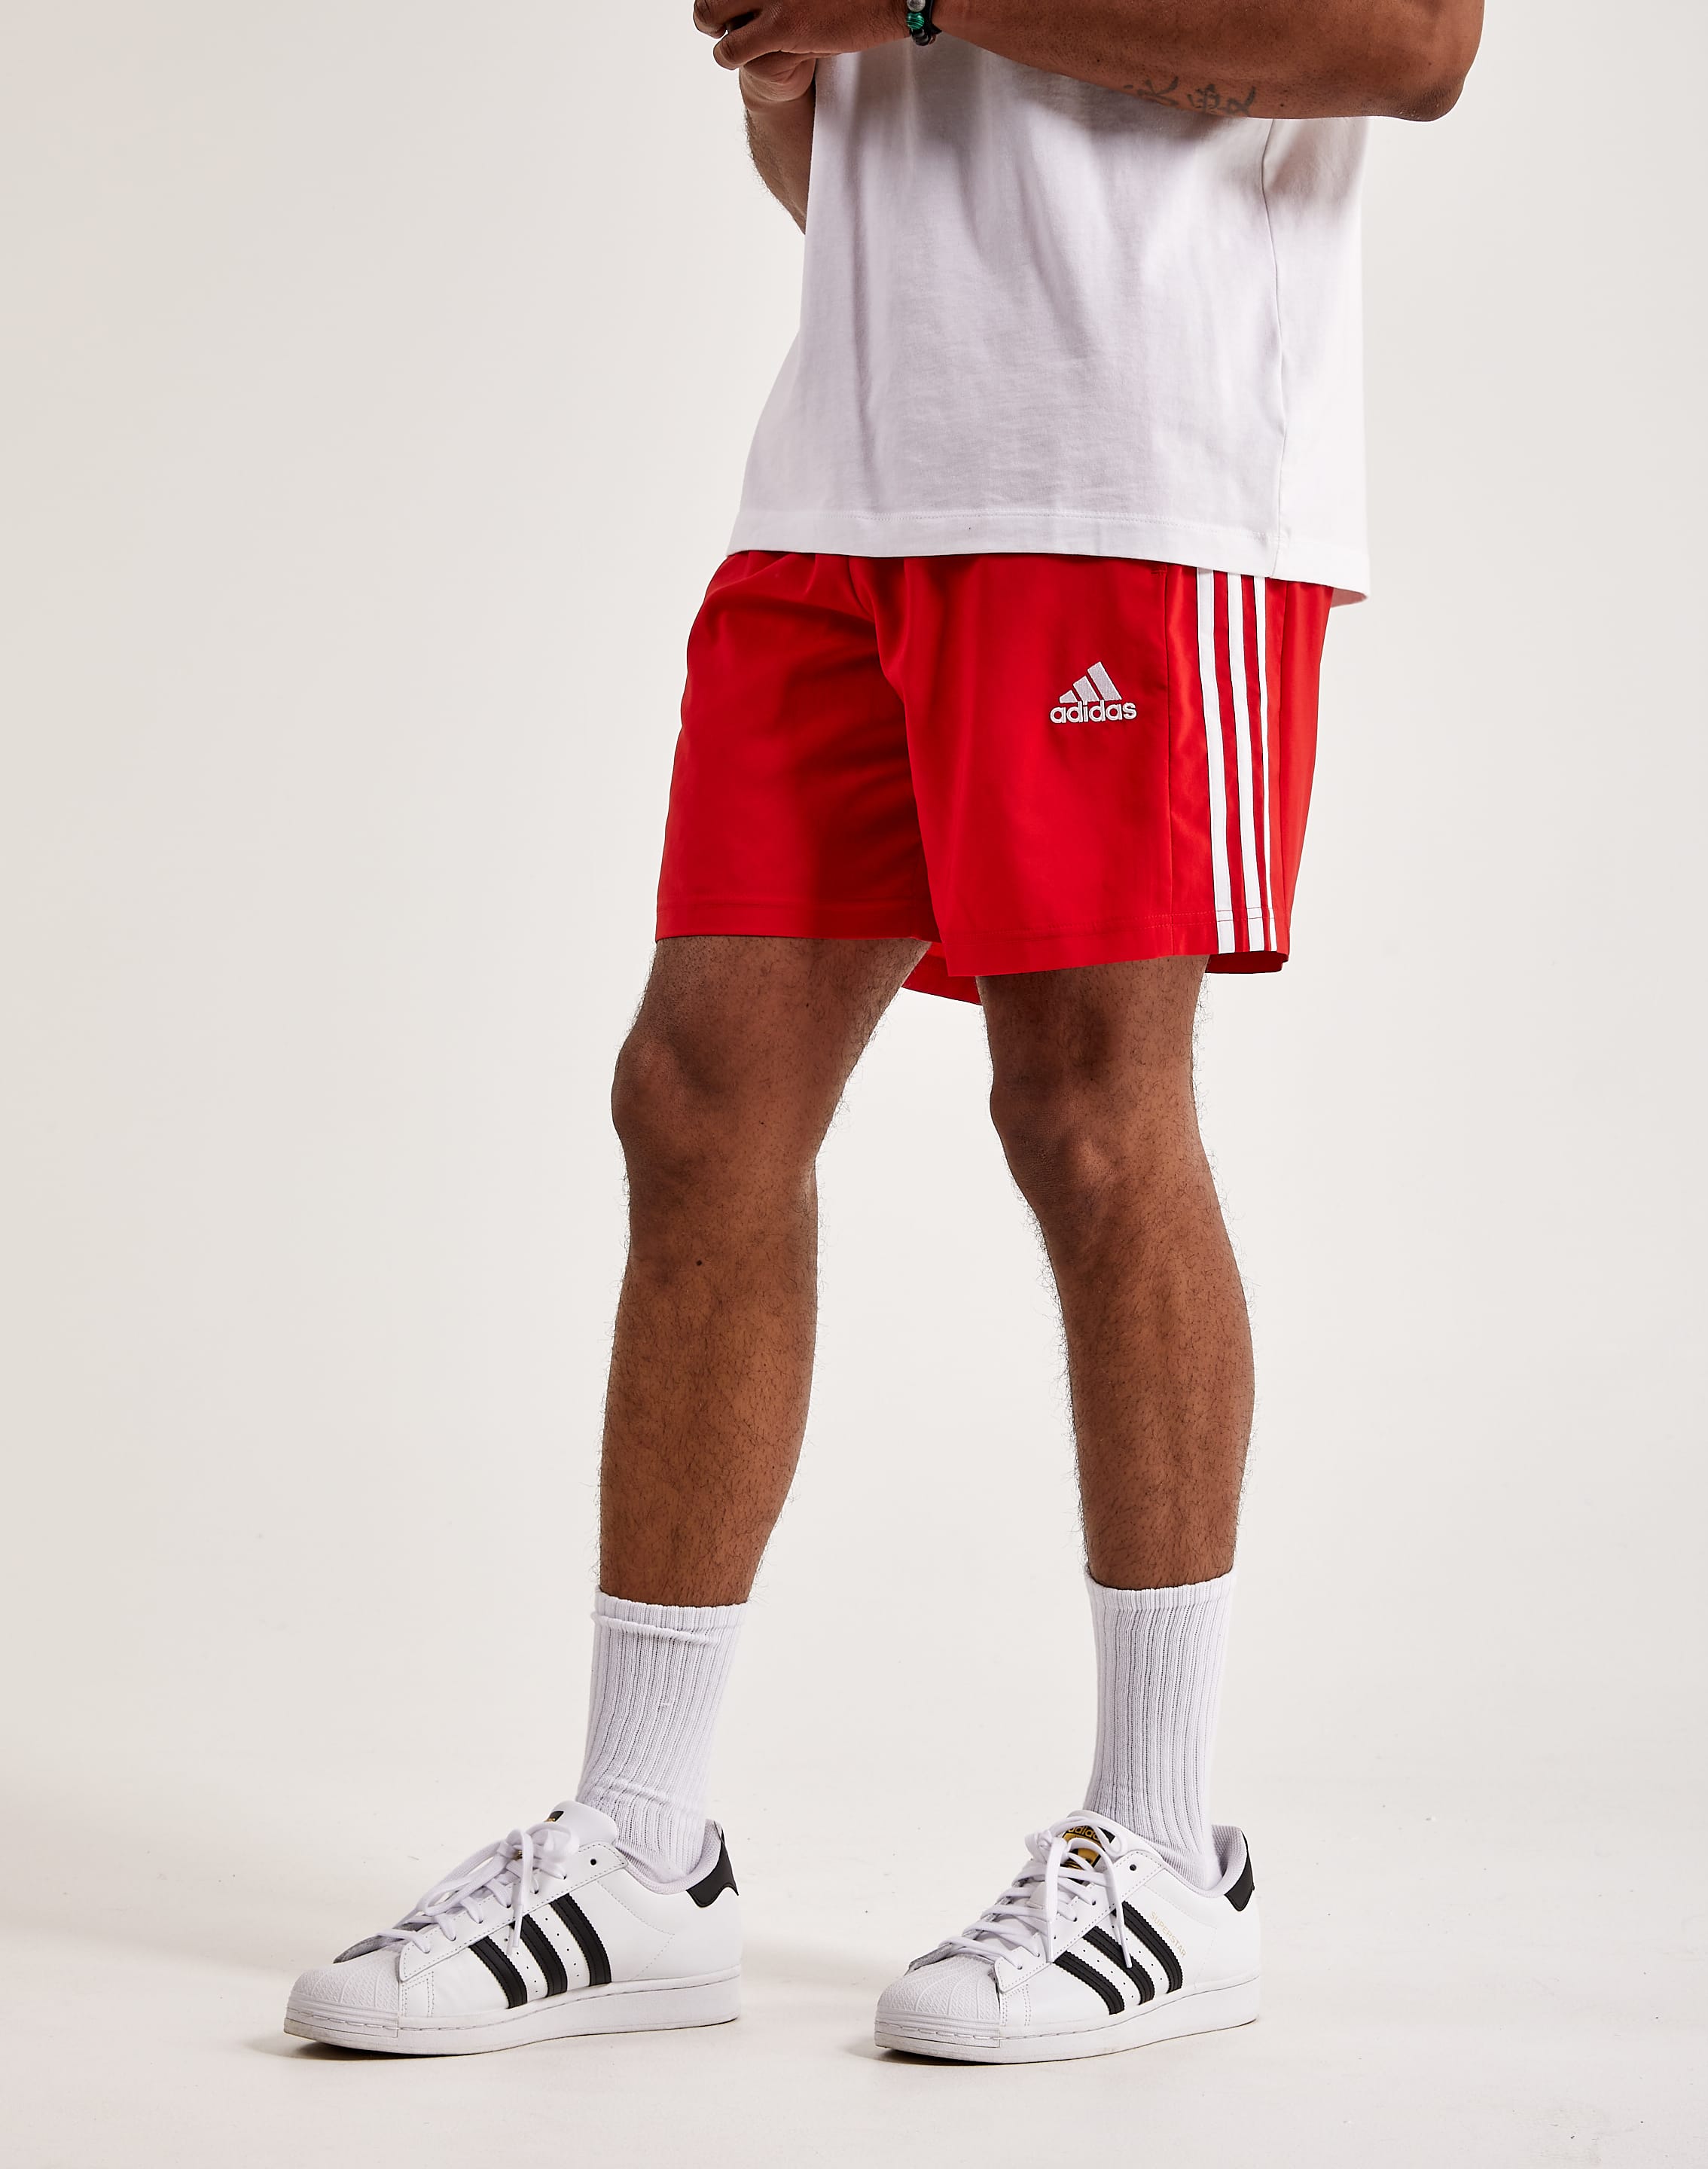 – Shorts Chelsea 3-Stripes DTLR Adidas